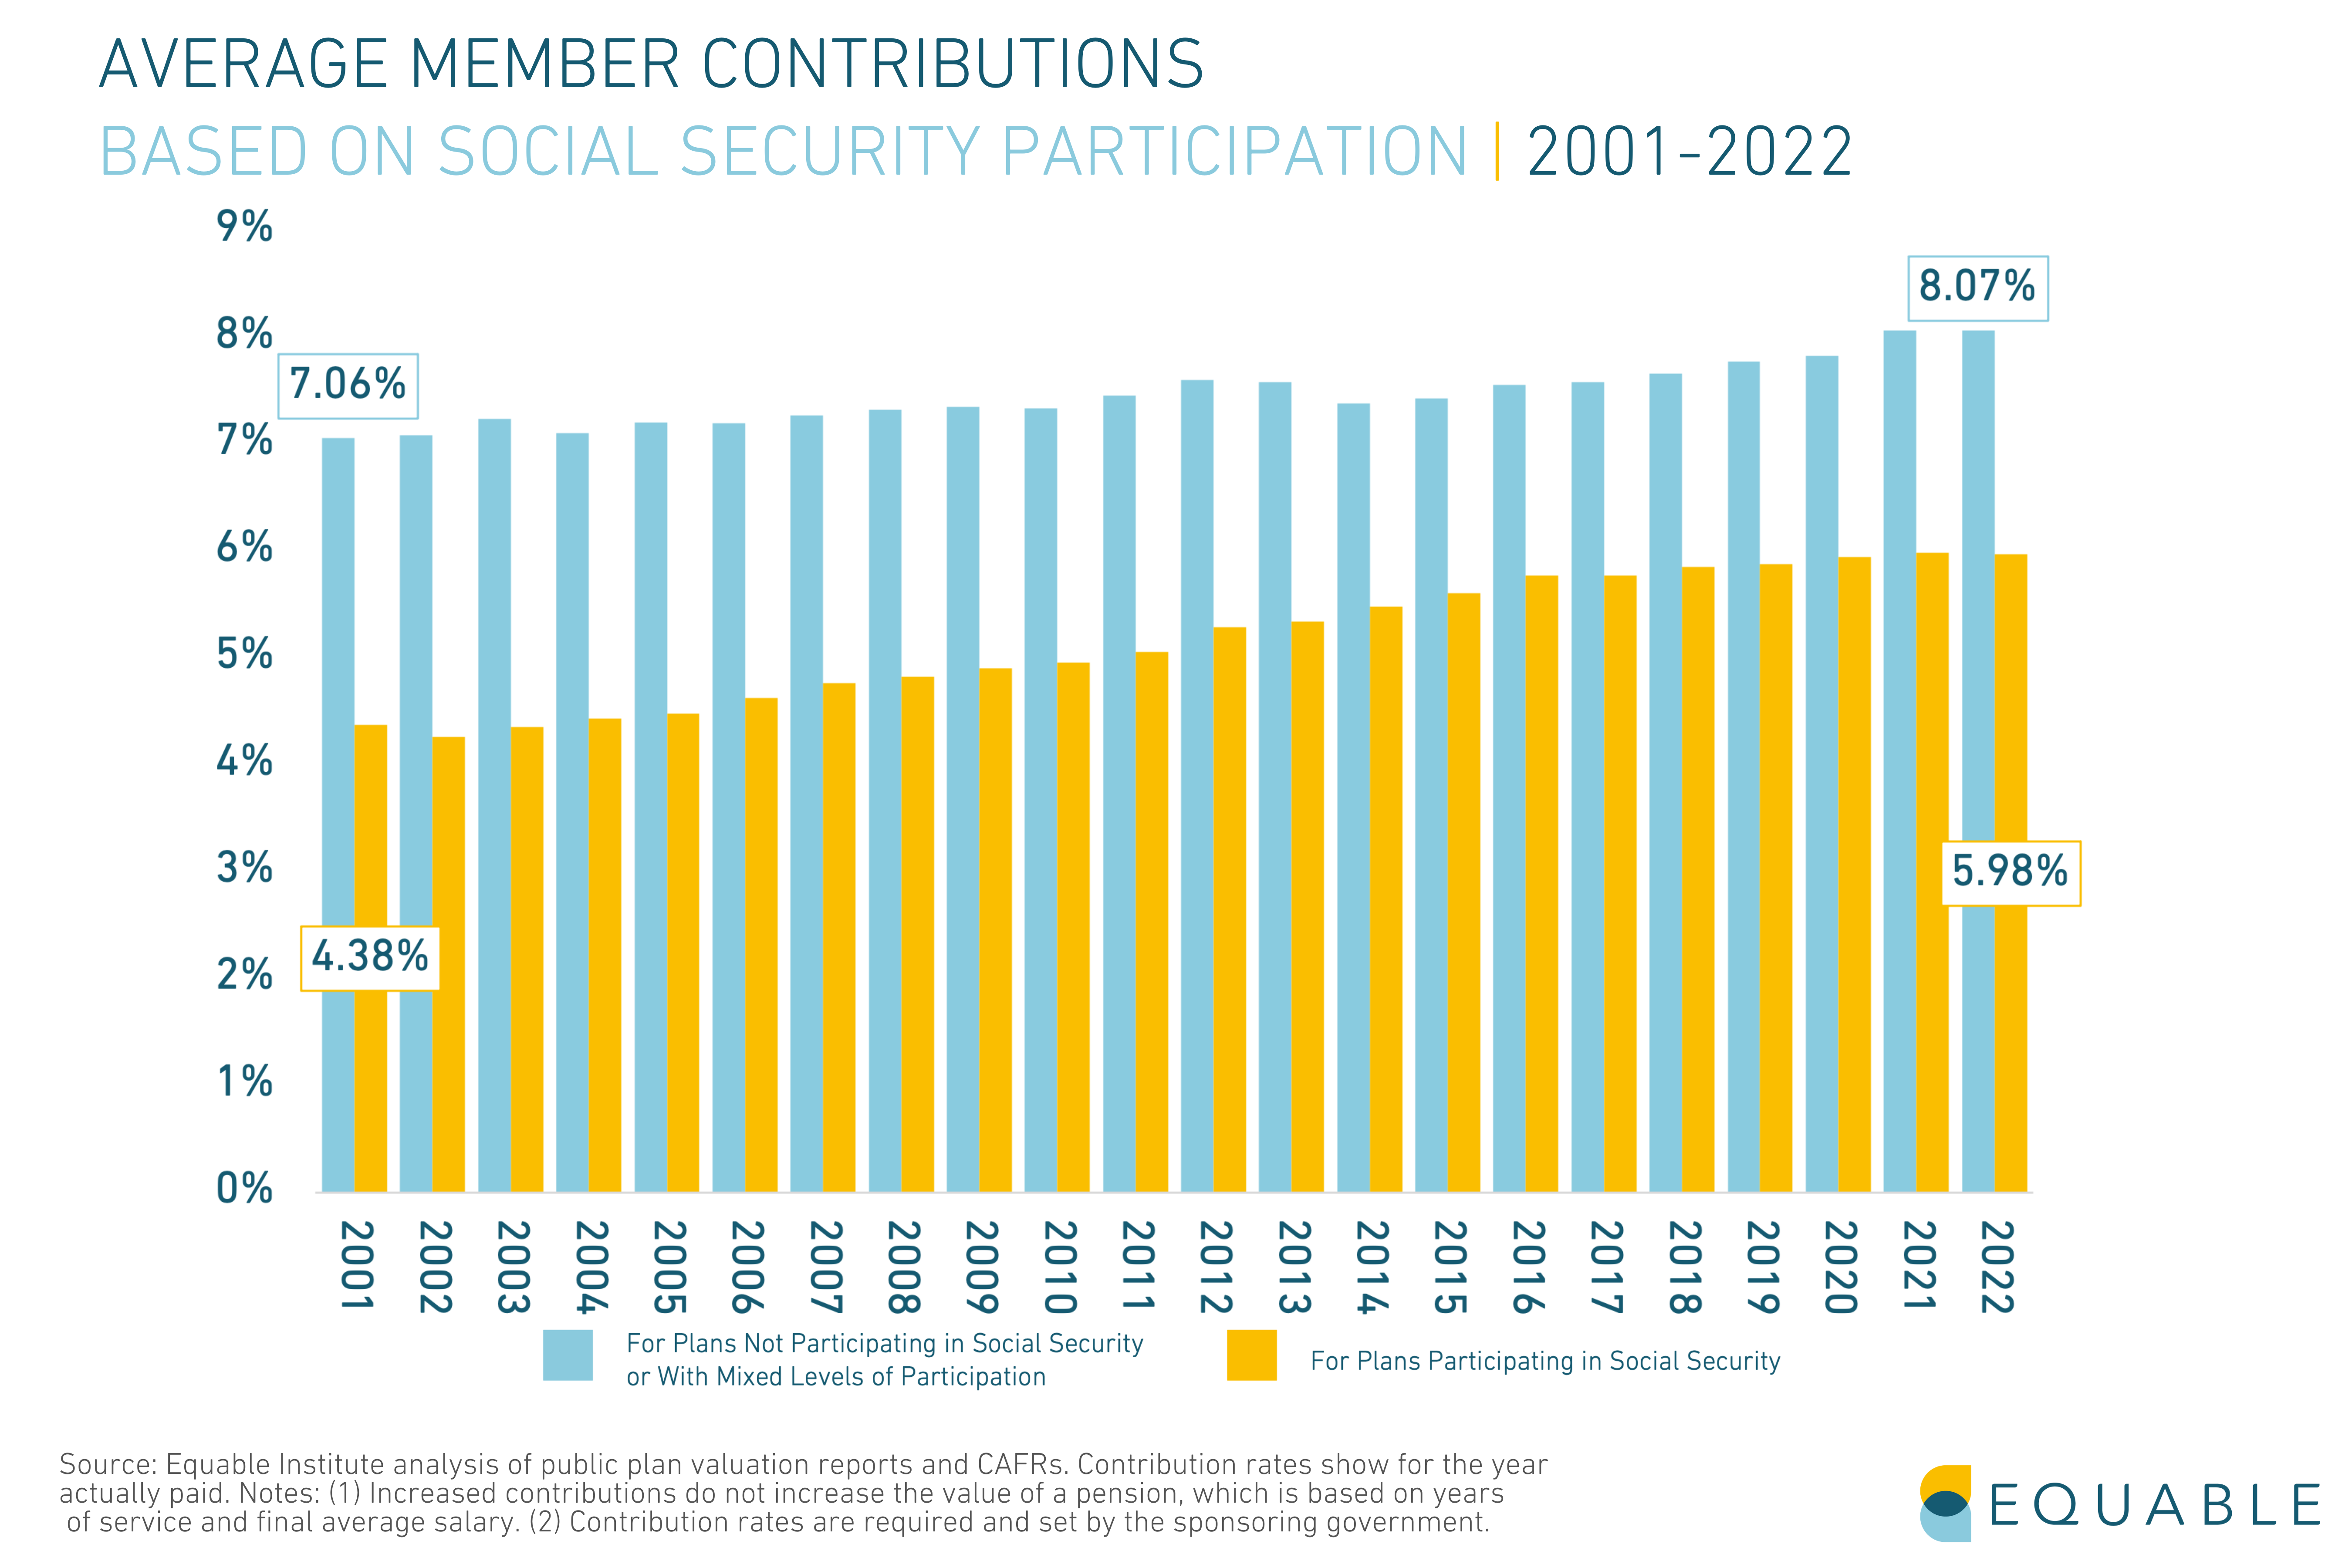 Average employee contribution rate for public pension plans, 2001 - 2022